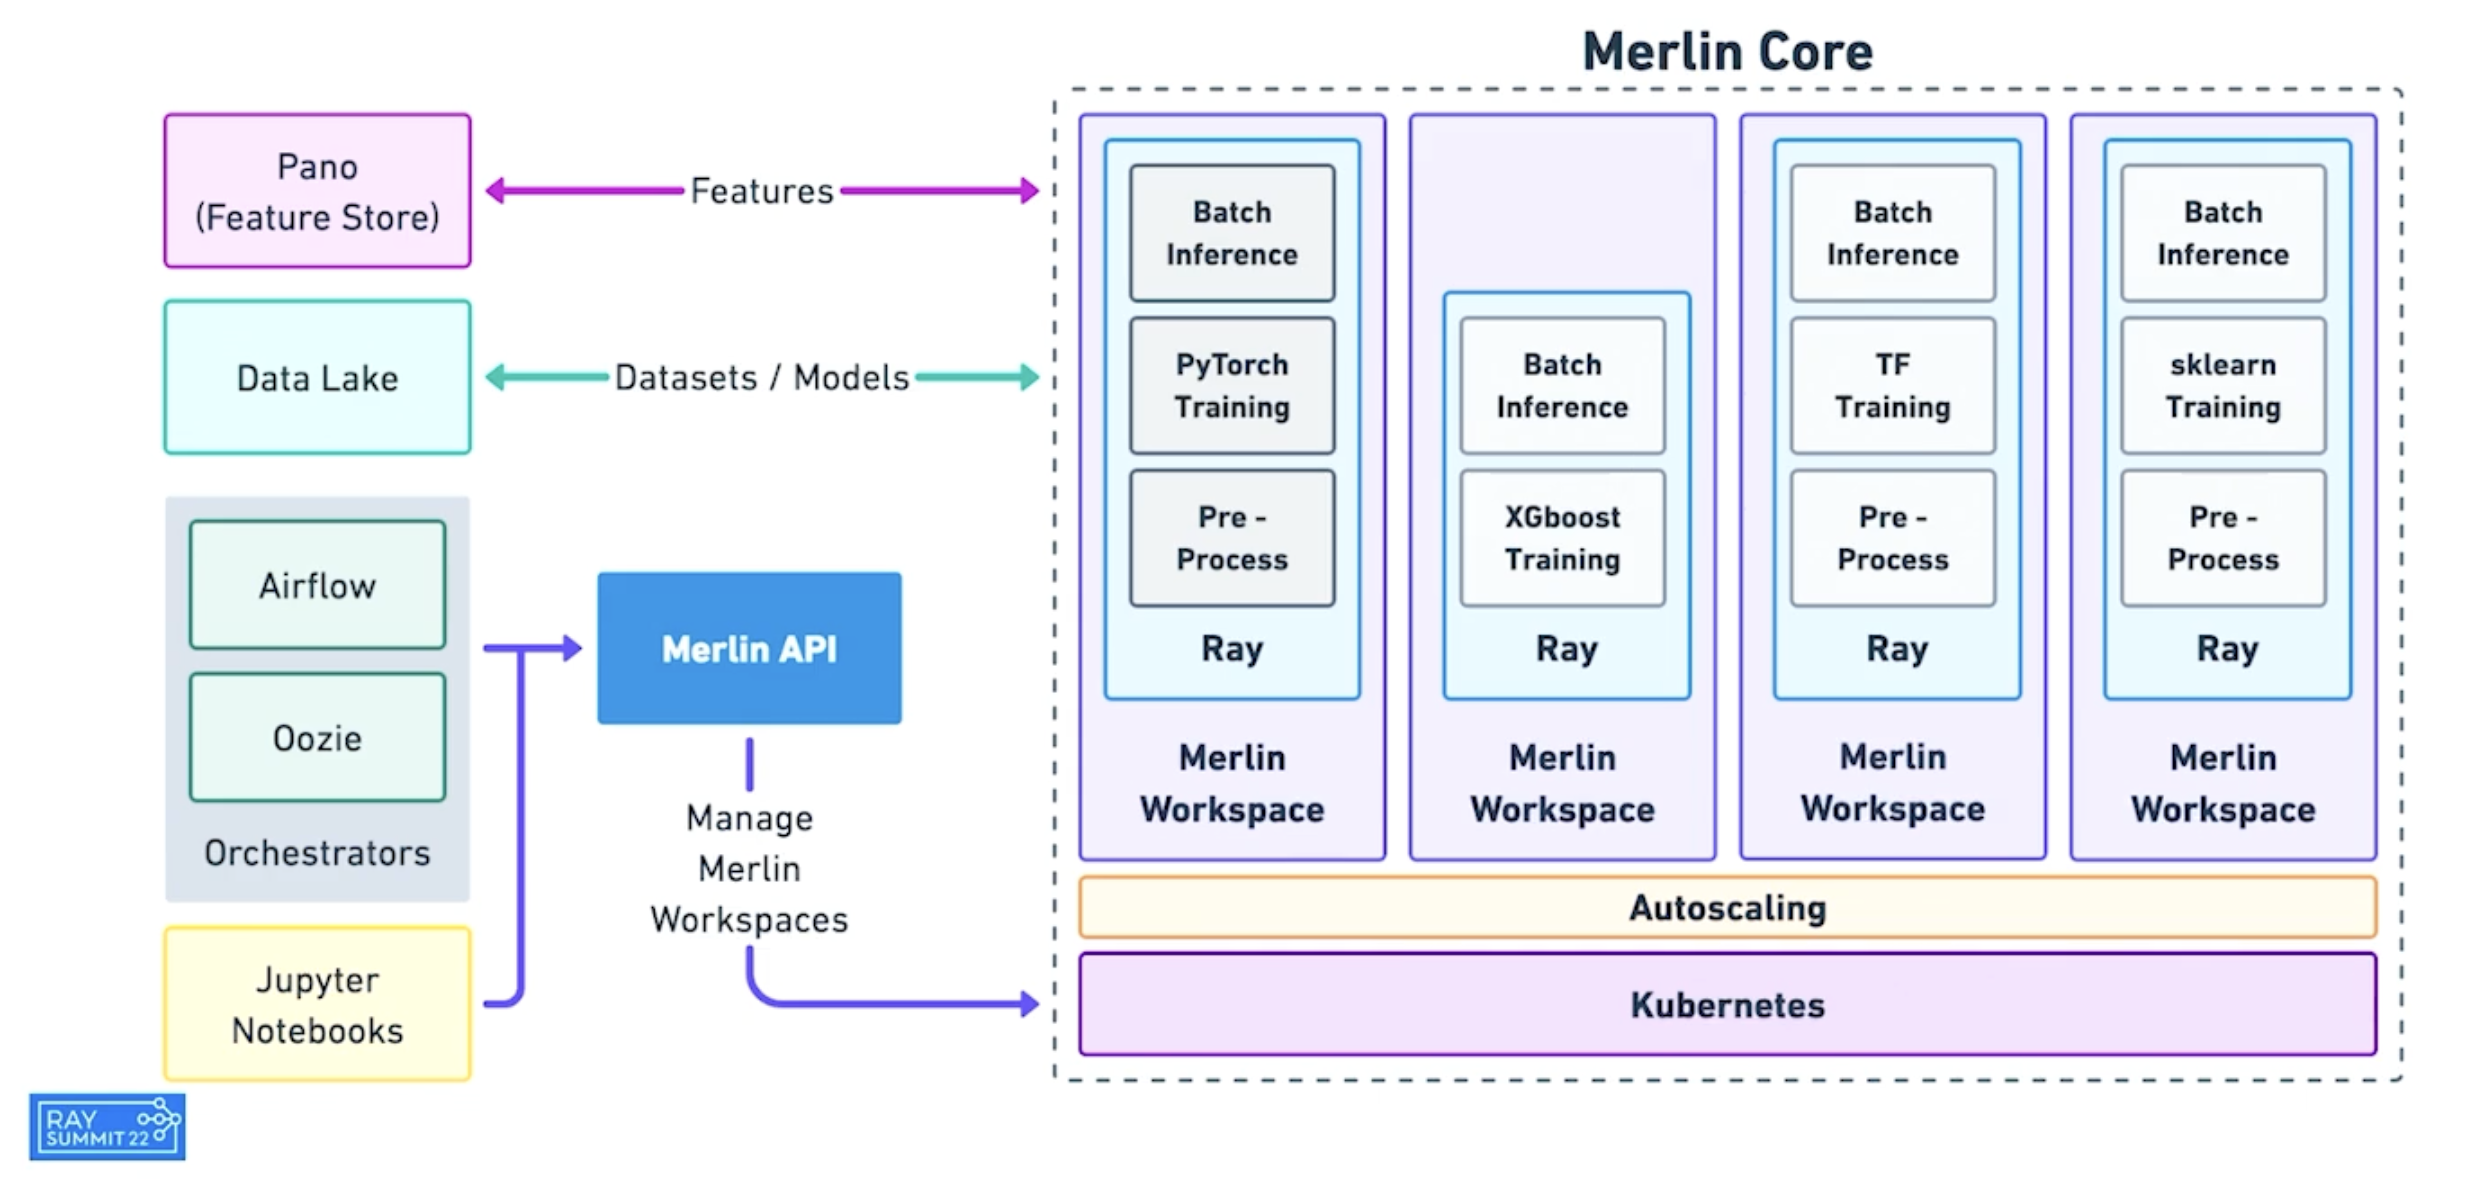 Merlin architecture built on Ray